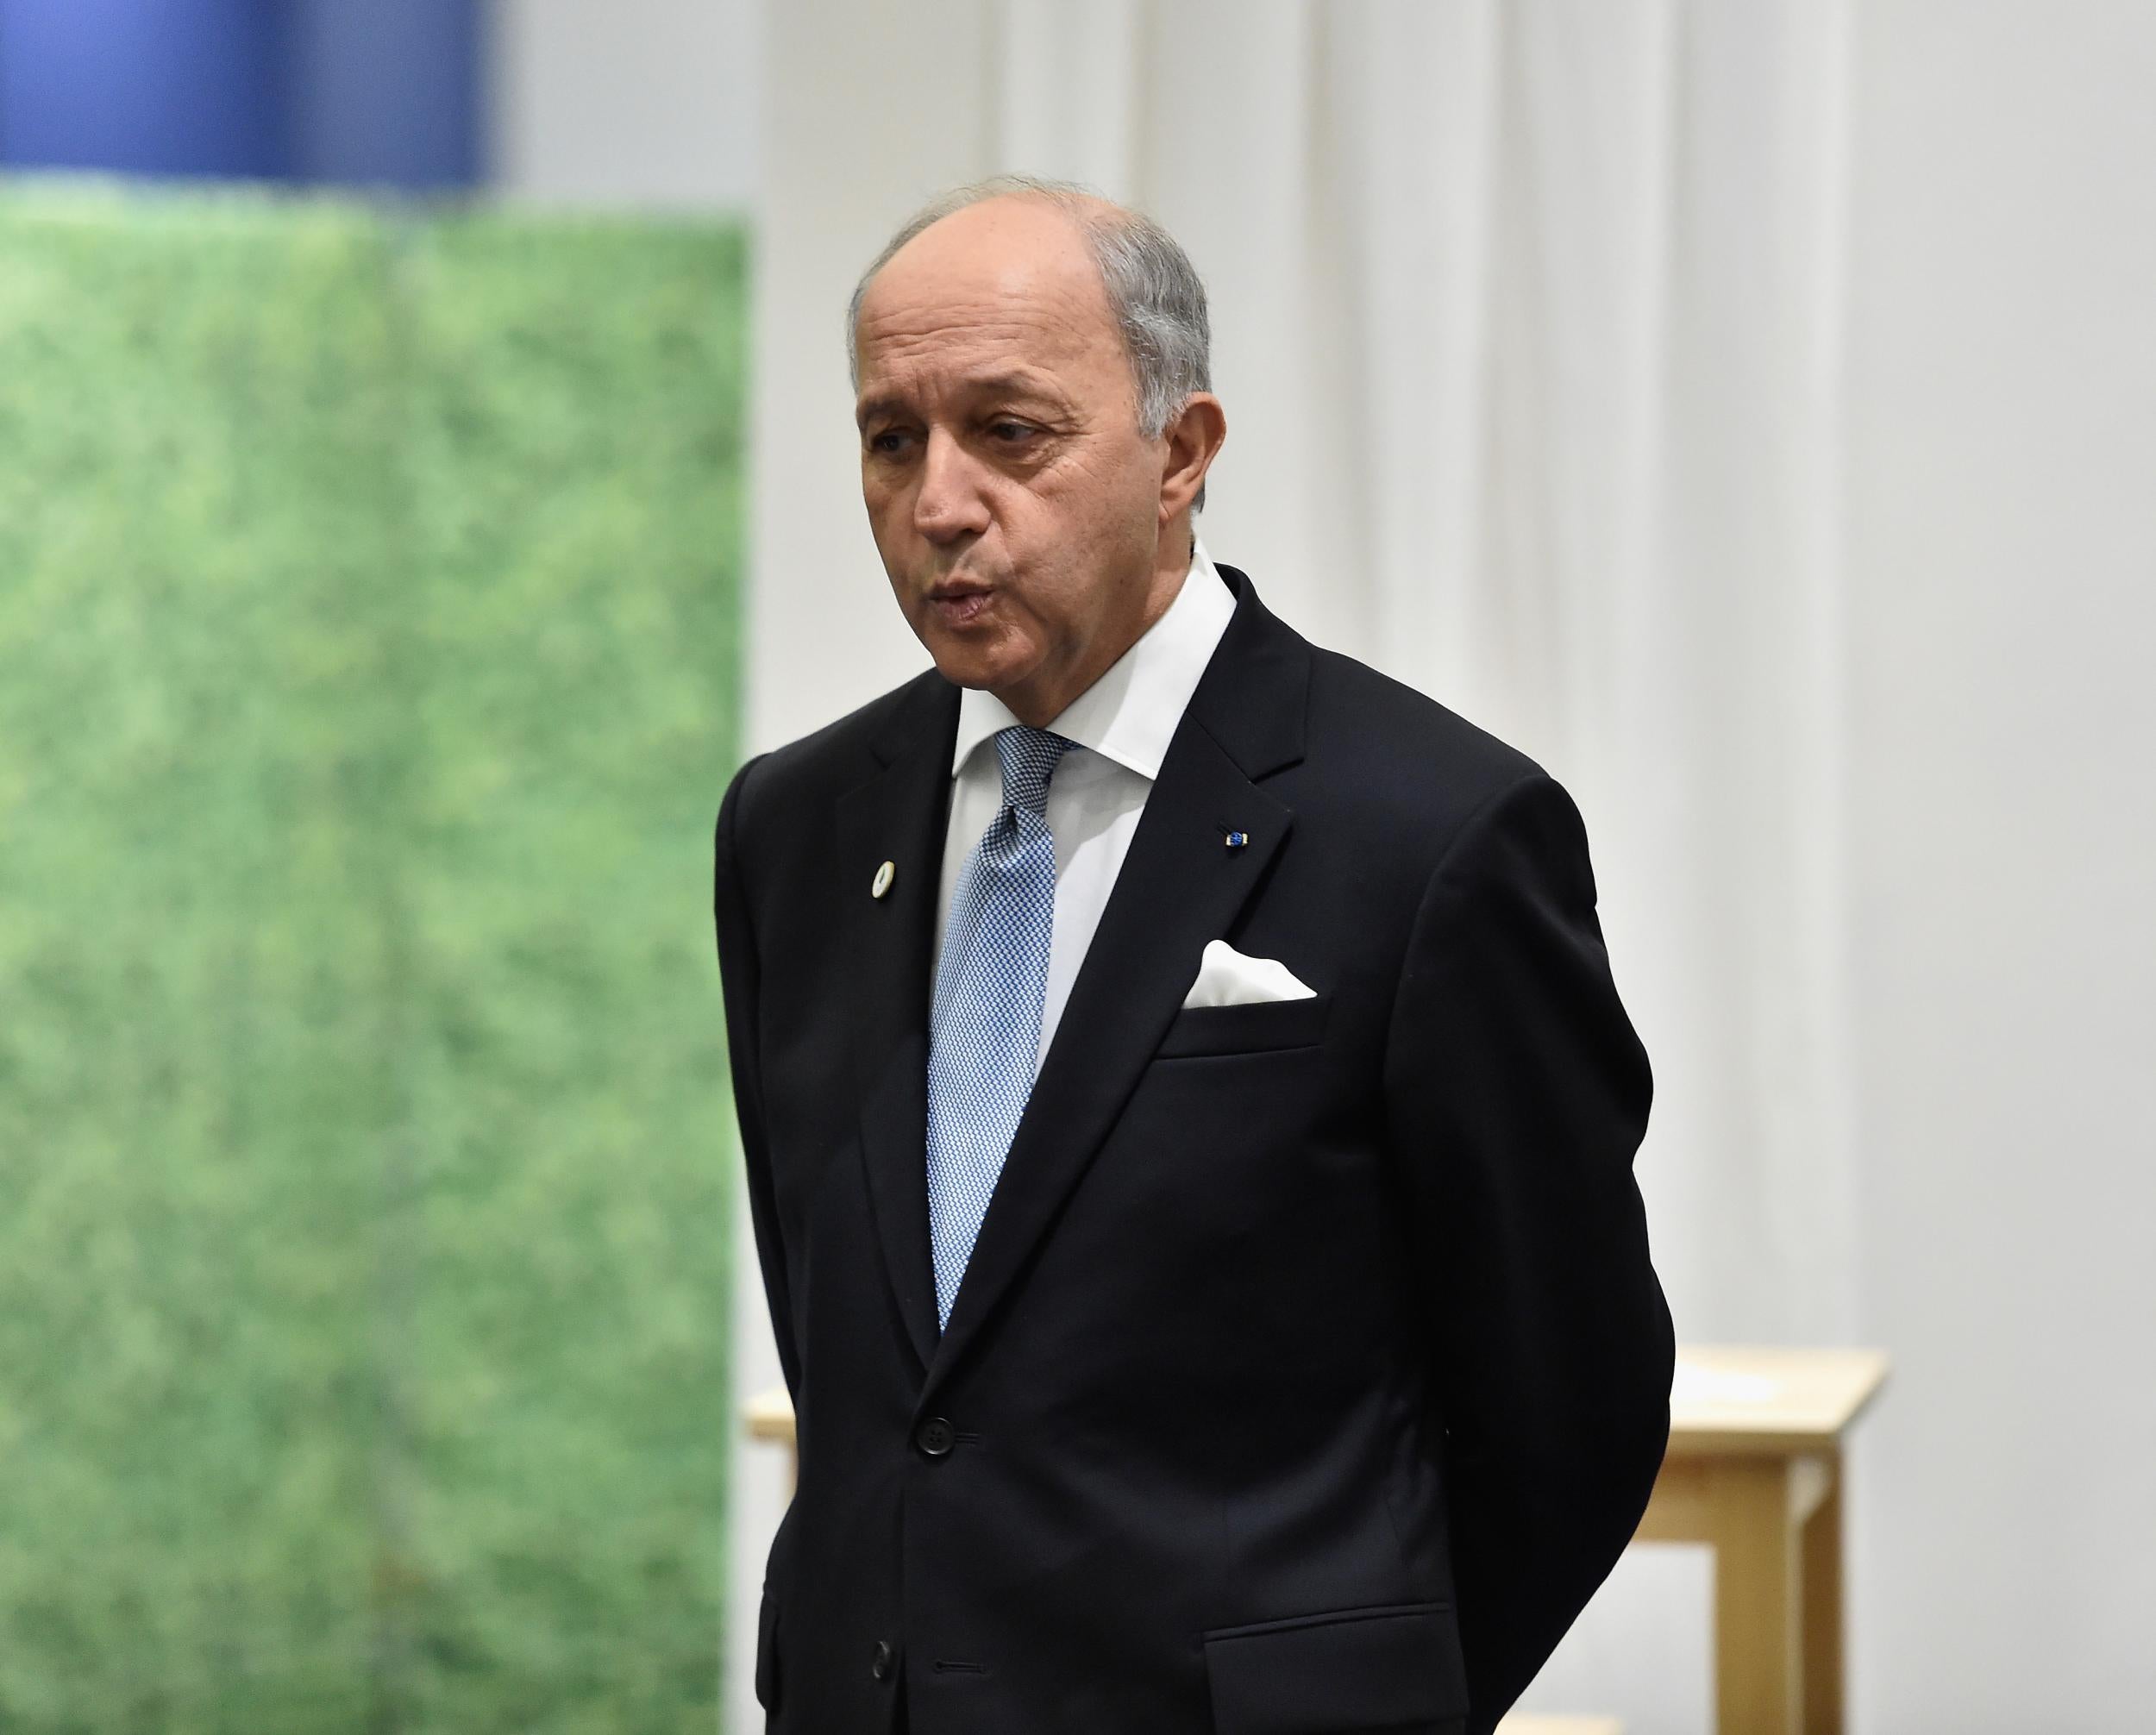 Laurent Fabius, who was a key player in establishing the agreement in 2015 which required nations to do their bit to combat greenhouse gases, emphasised the importance of the pact at a climate conference